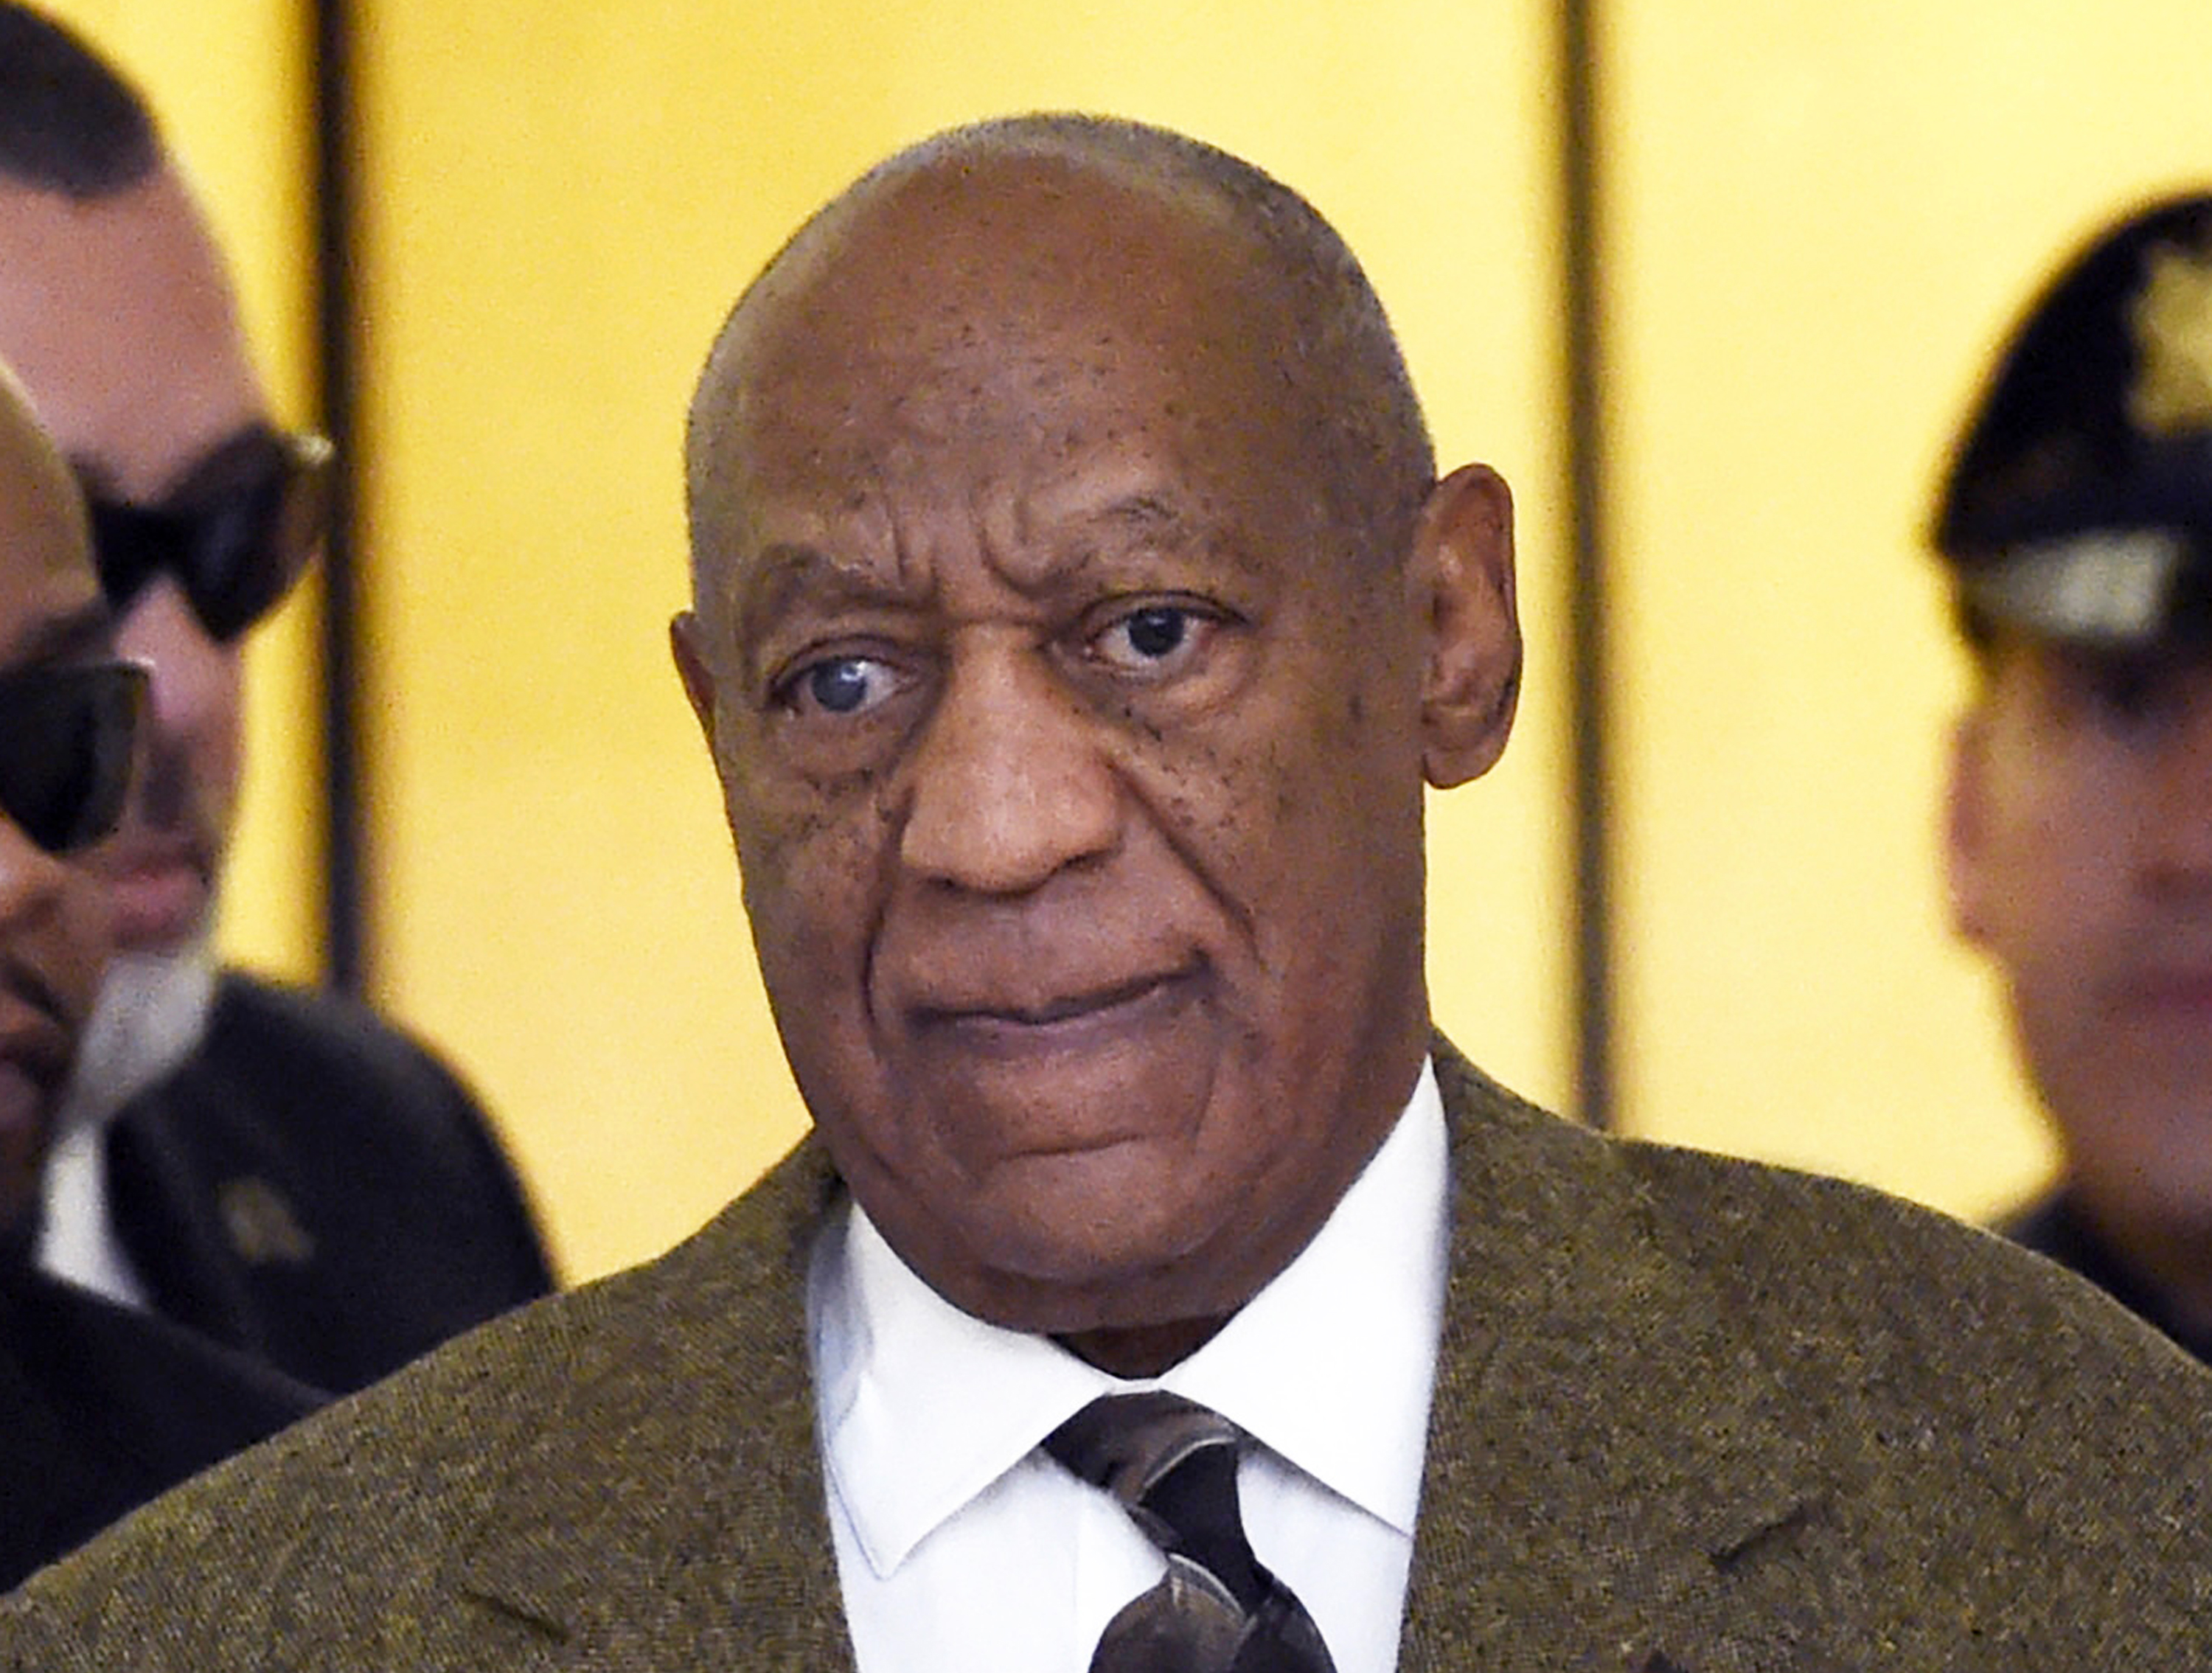 Cosby Ordered To Stand Trial In Sex Assault Case